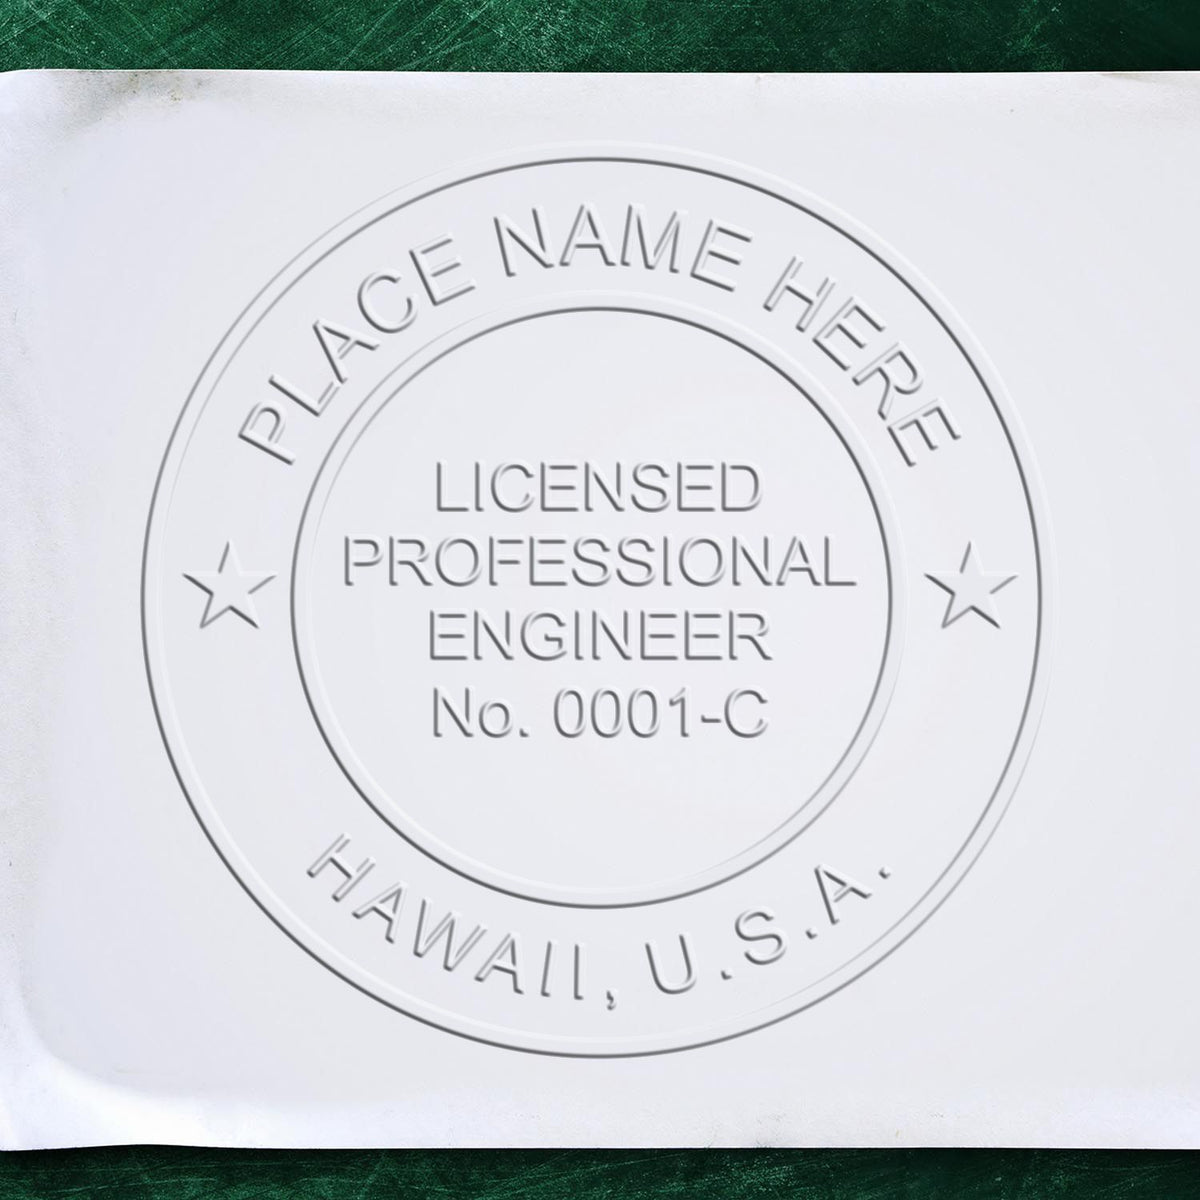 An in use photo of the Hybrid Hawaii Engineer Seal showing a sample imprint on a cardstock